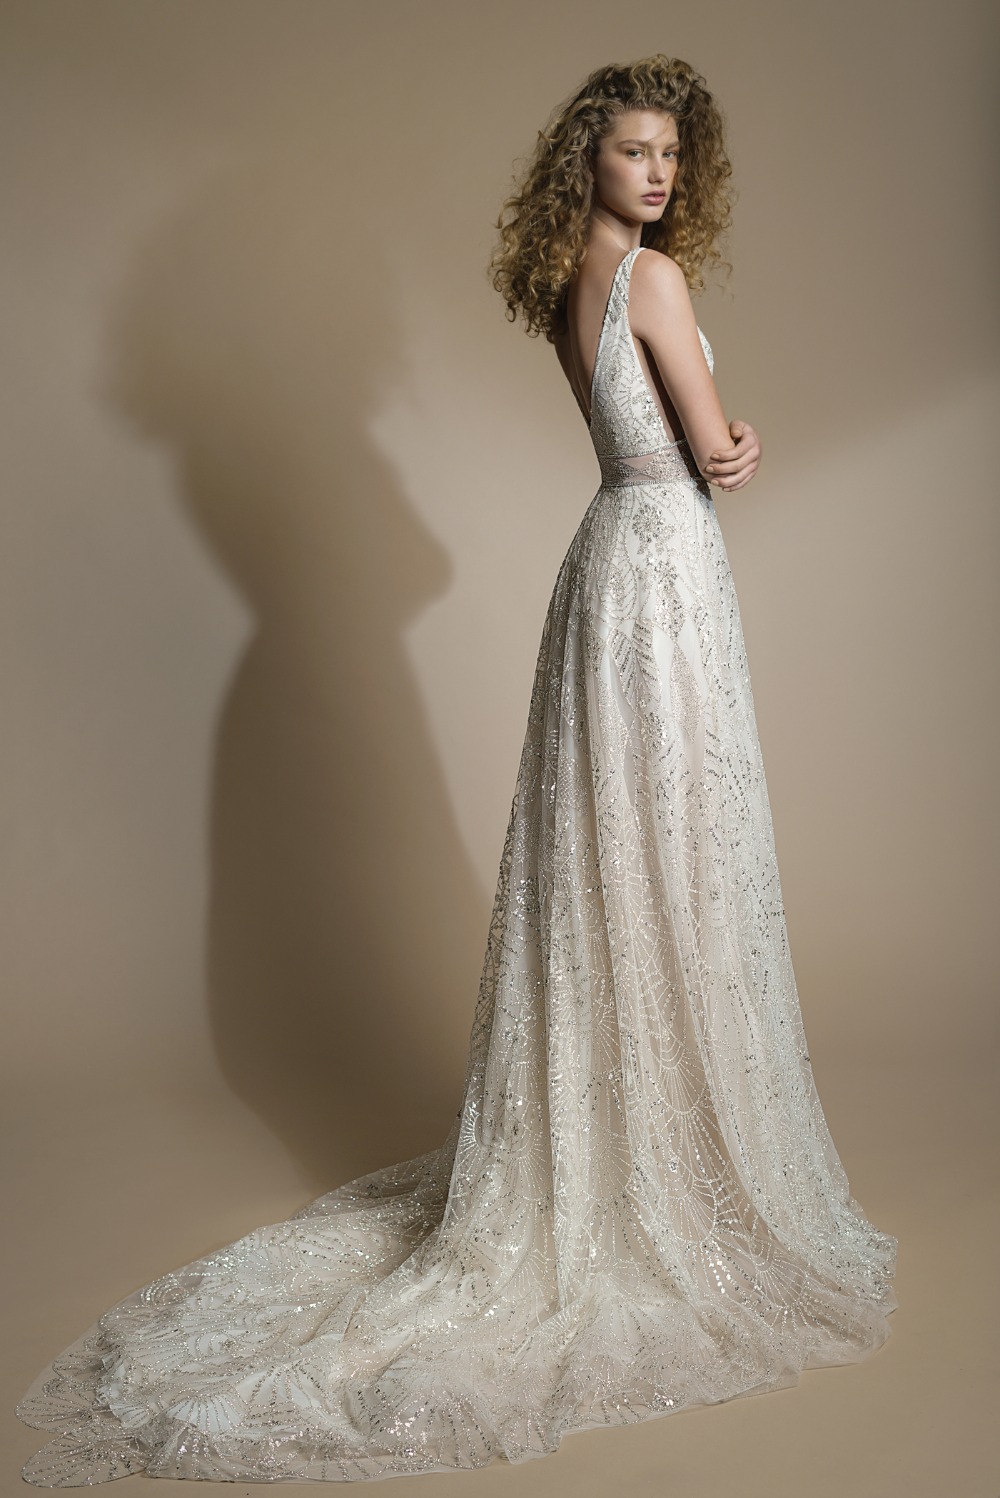 shimmering sequined tulle with a striking Galia Lahav wedding dress with a geometric silver patter over a nude background